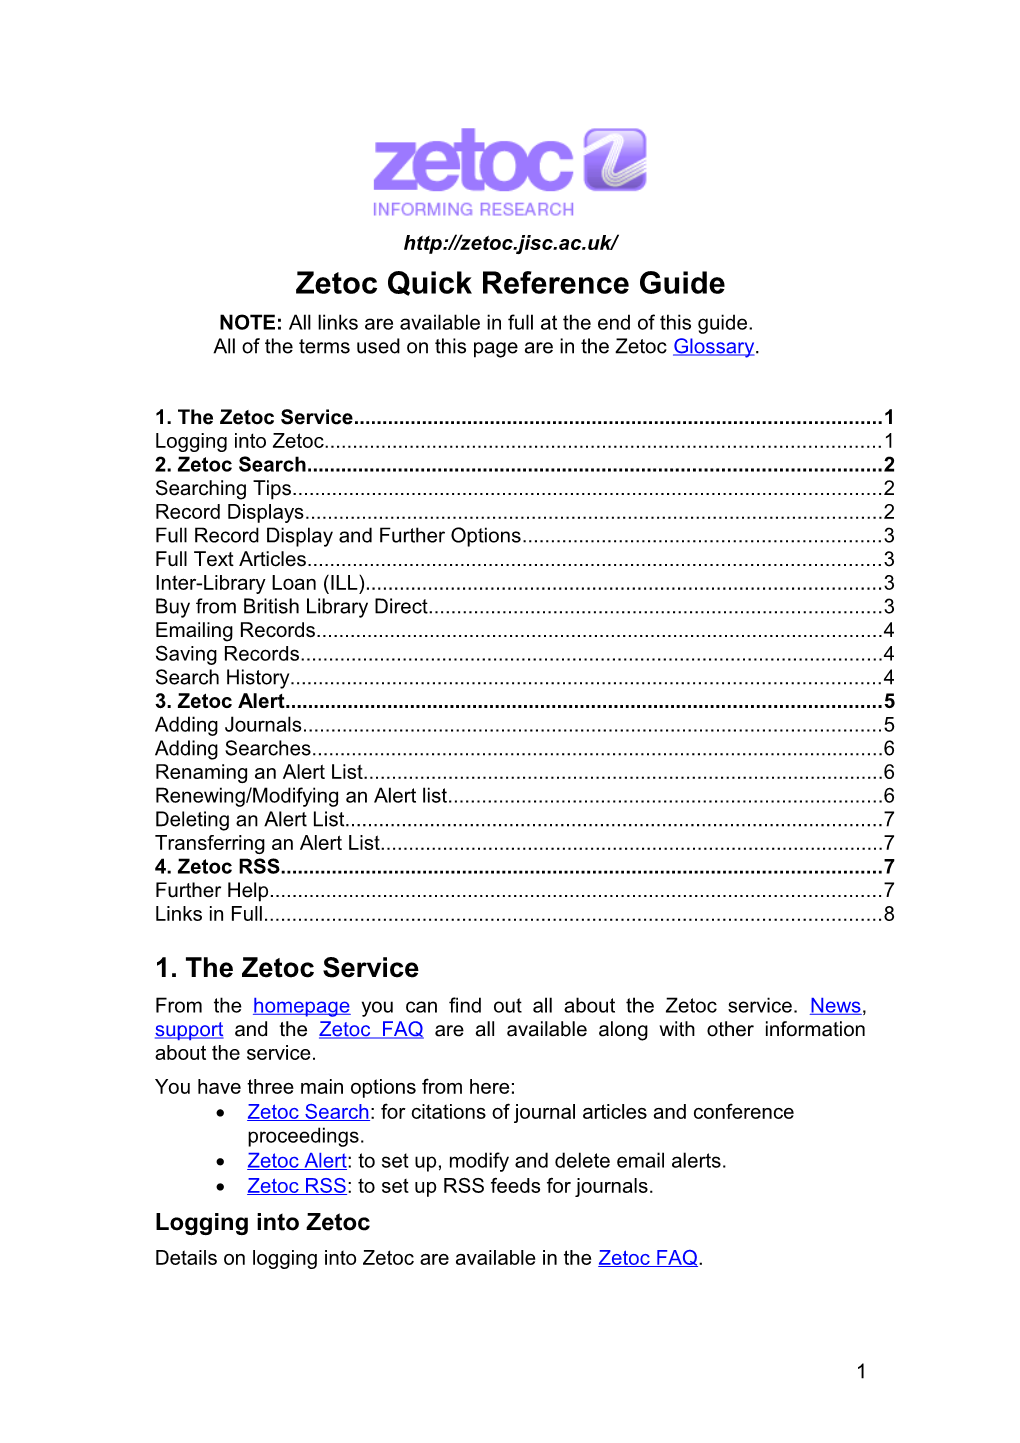 Quick Reference Guide to Using Zetoc